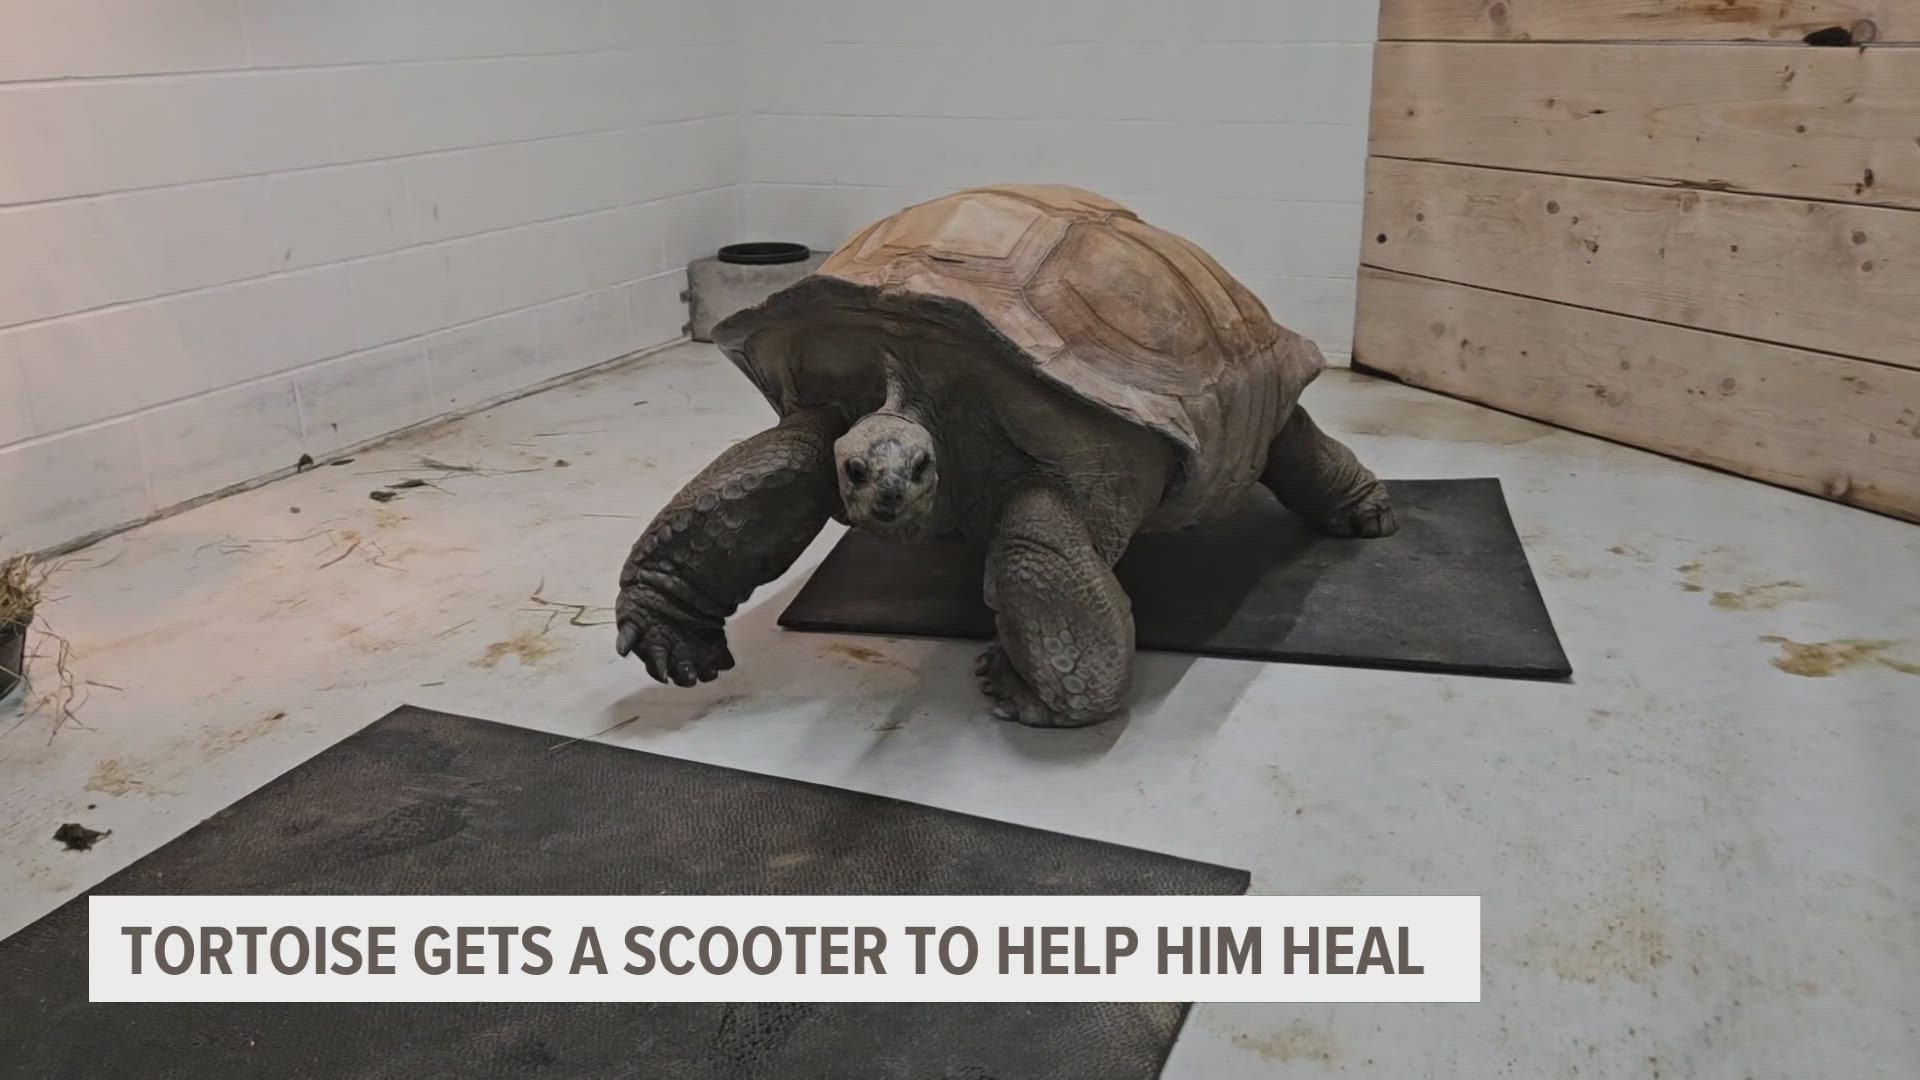 Slow and steady wins the race for the tortoise, unless you give him some wheels.